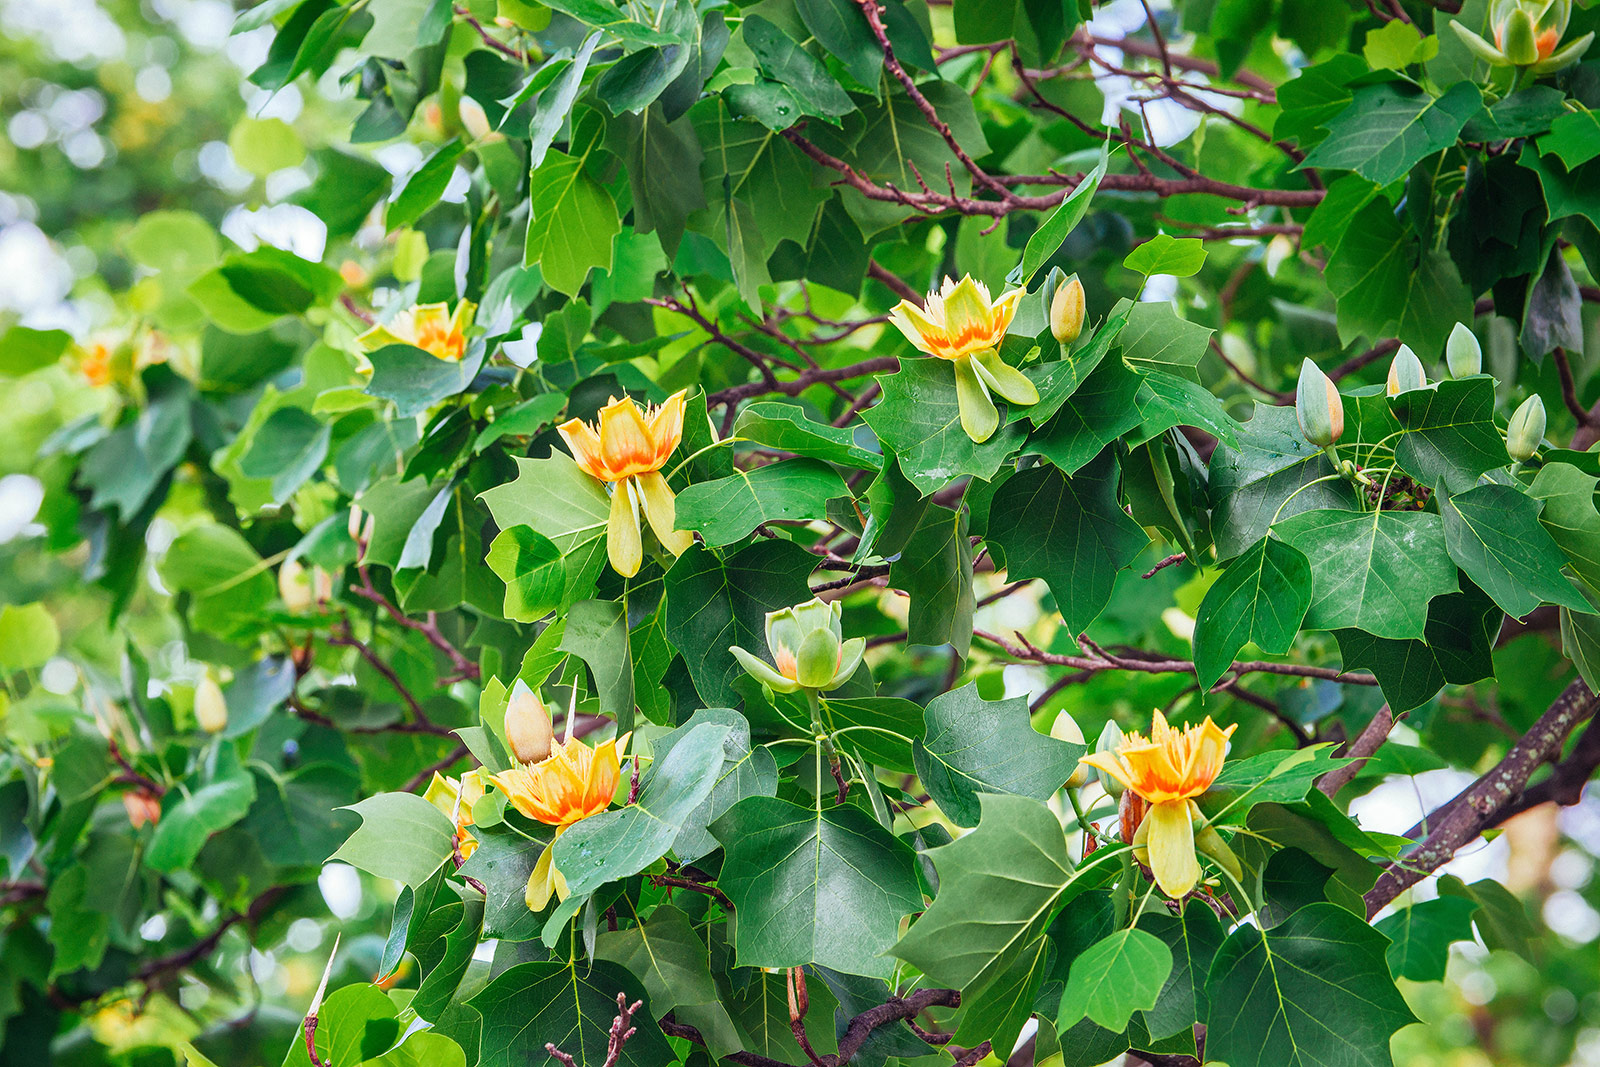 Close-up of fast-growing tulip poplar tree branches with yellow flowers in bloom